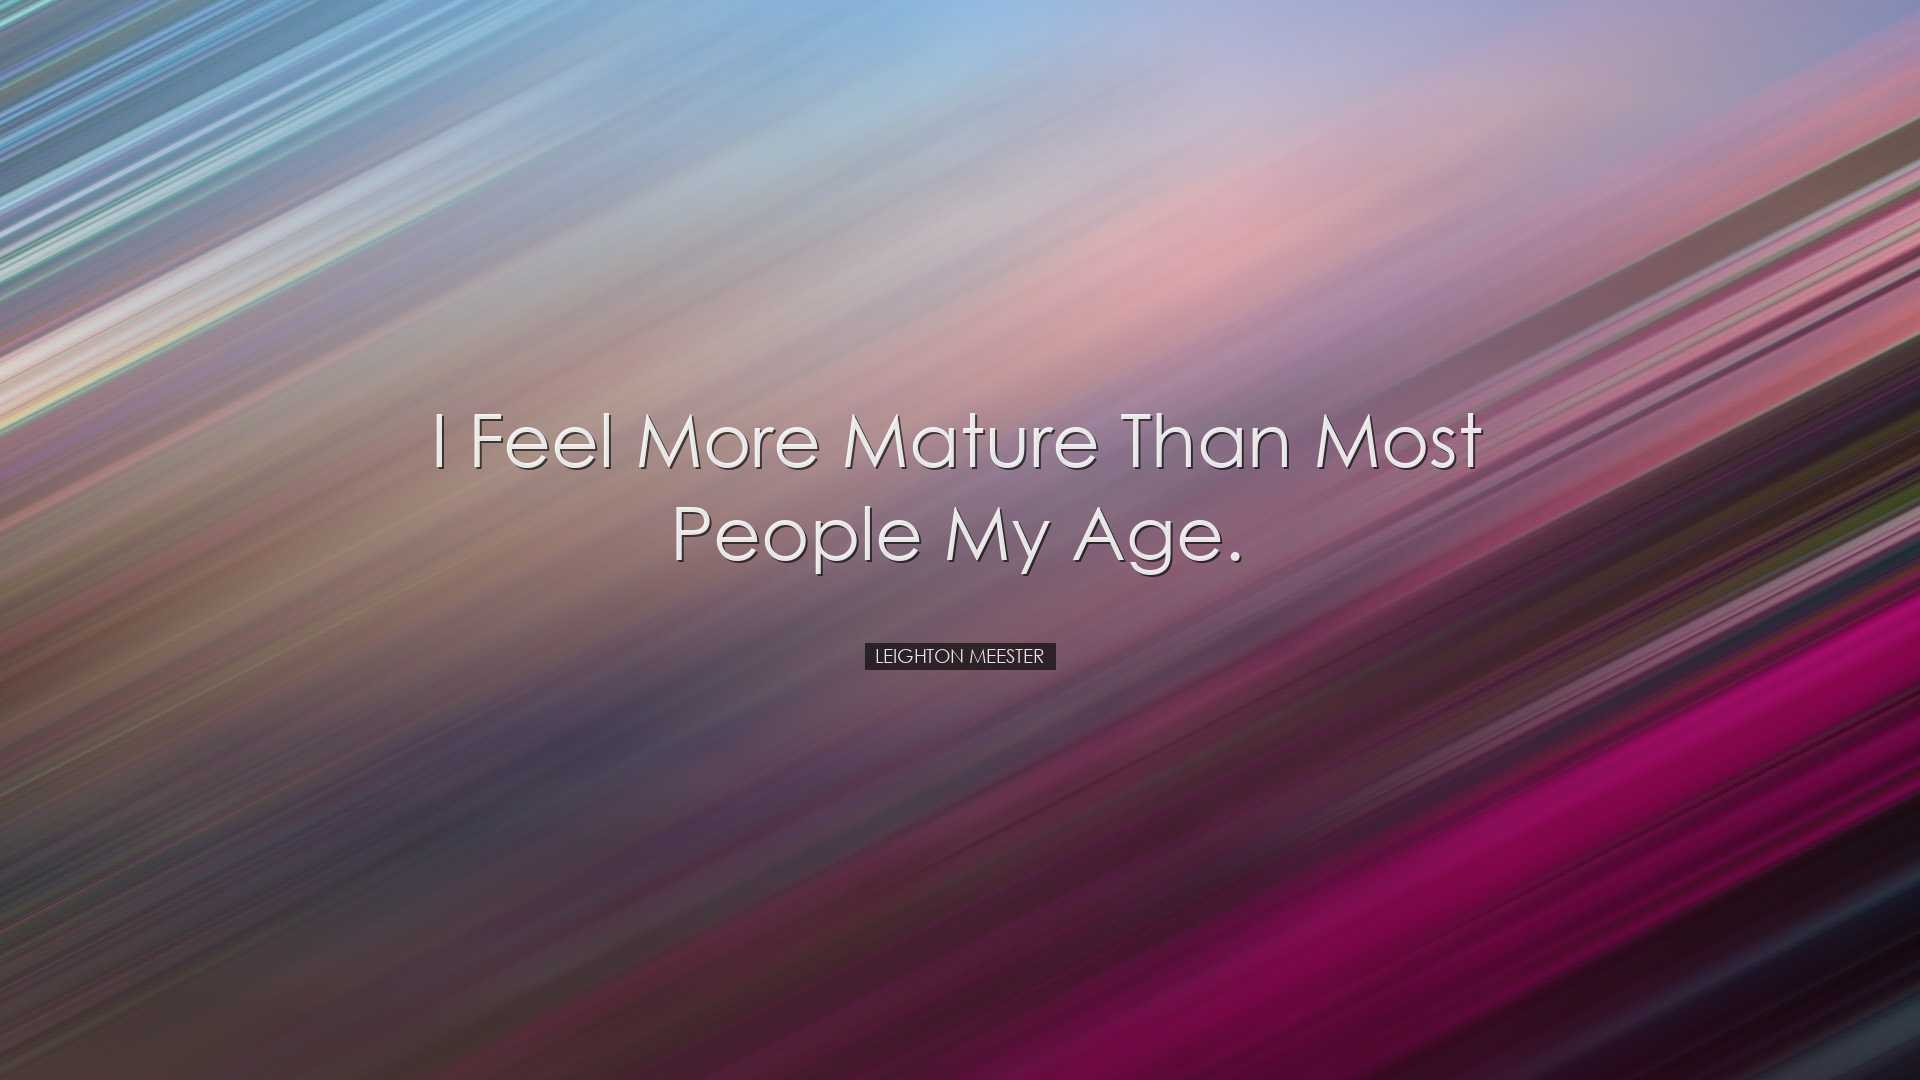 I feel more mature than most people my age. - Leighton Meester